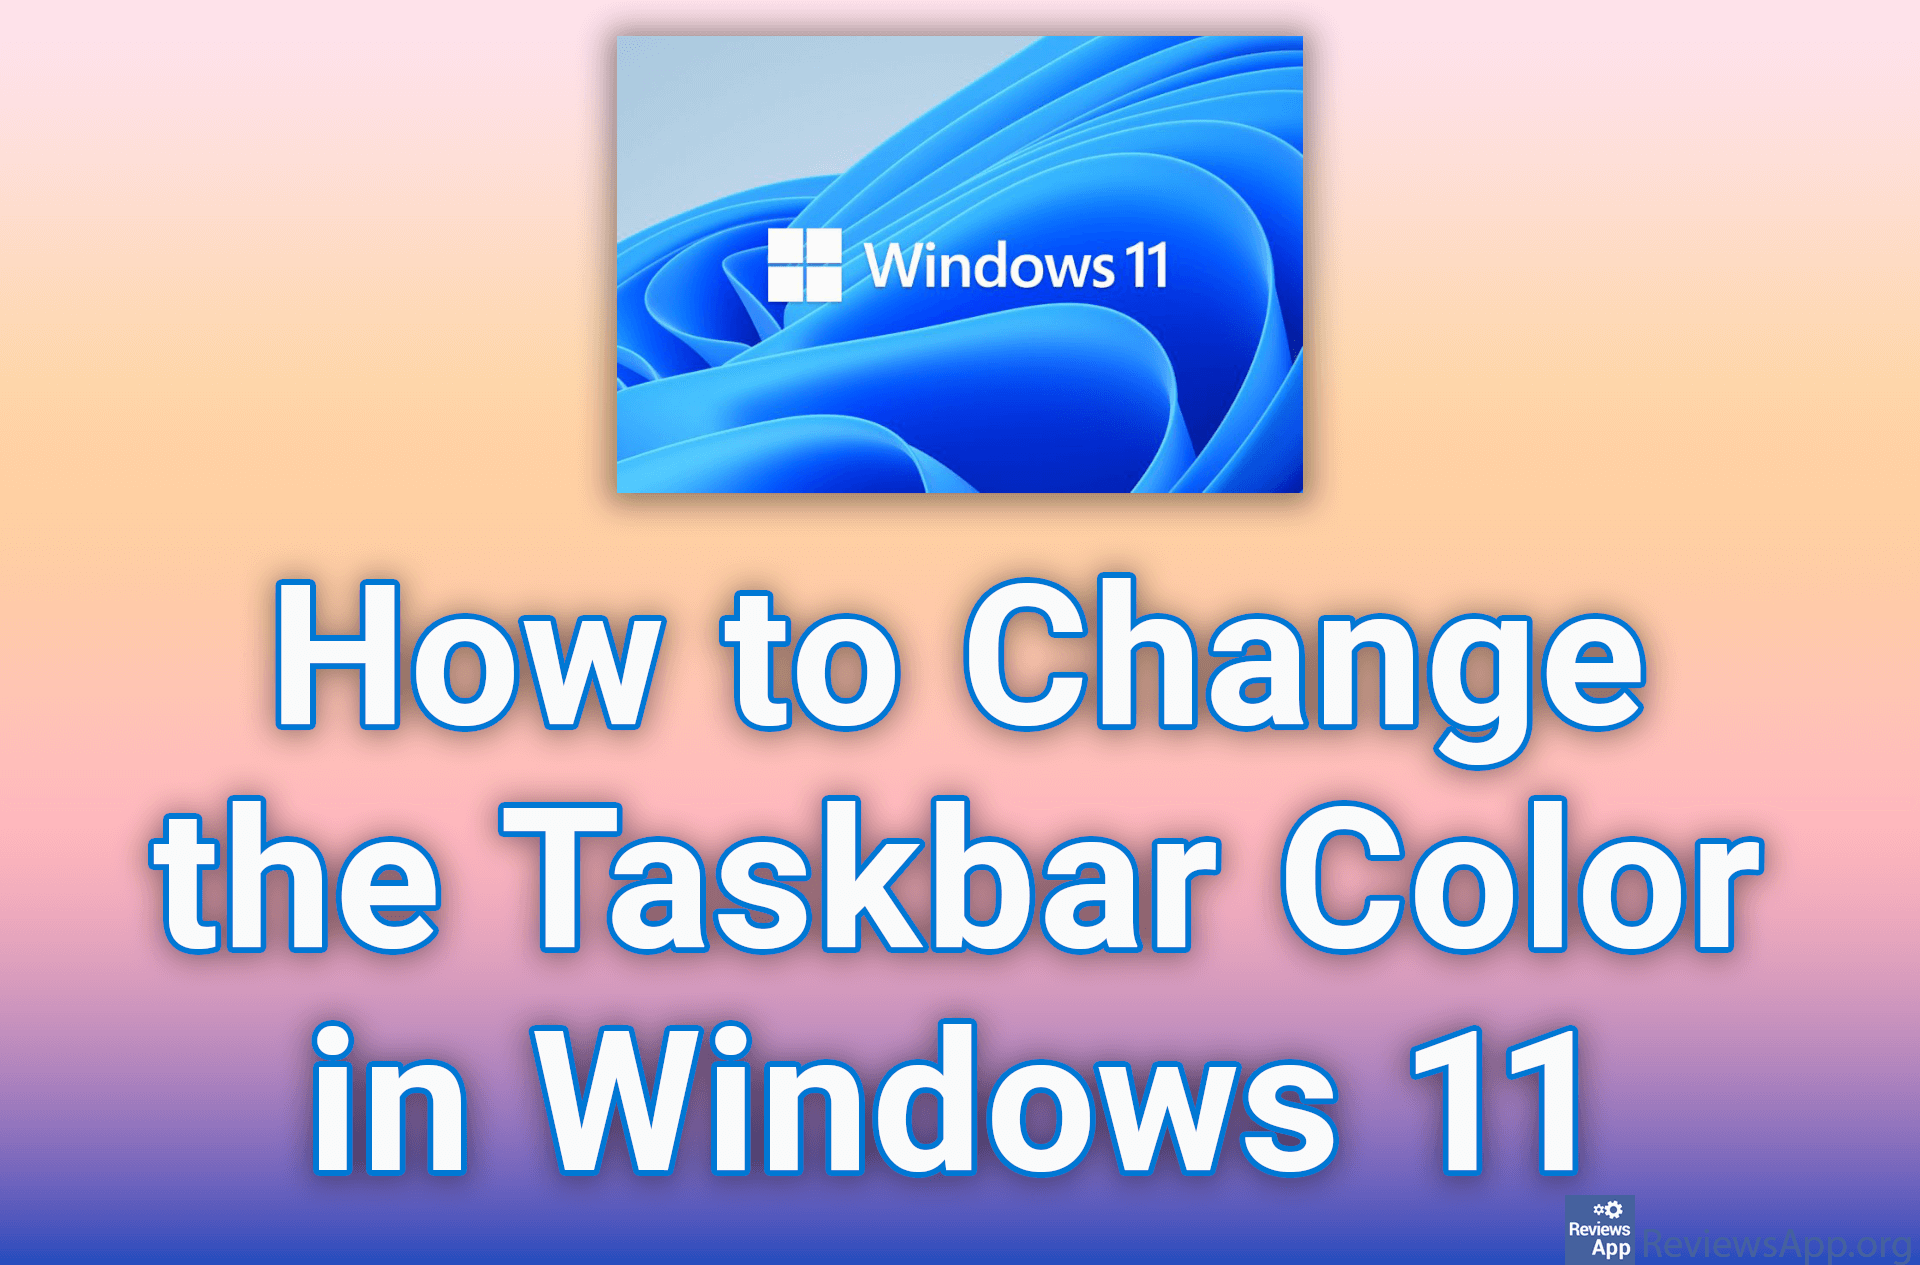 How to Change the Taskbar Color in Windows 11